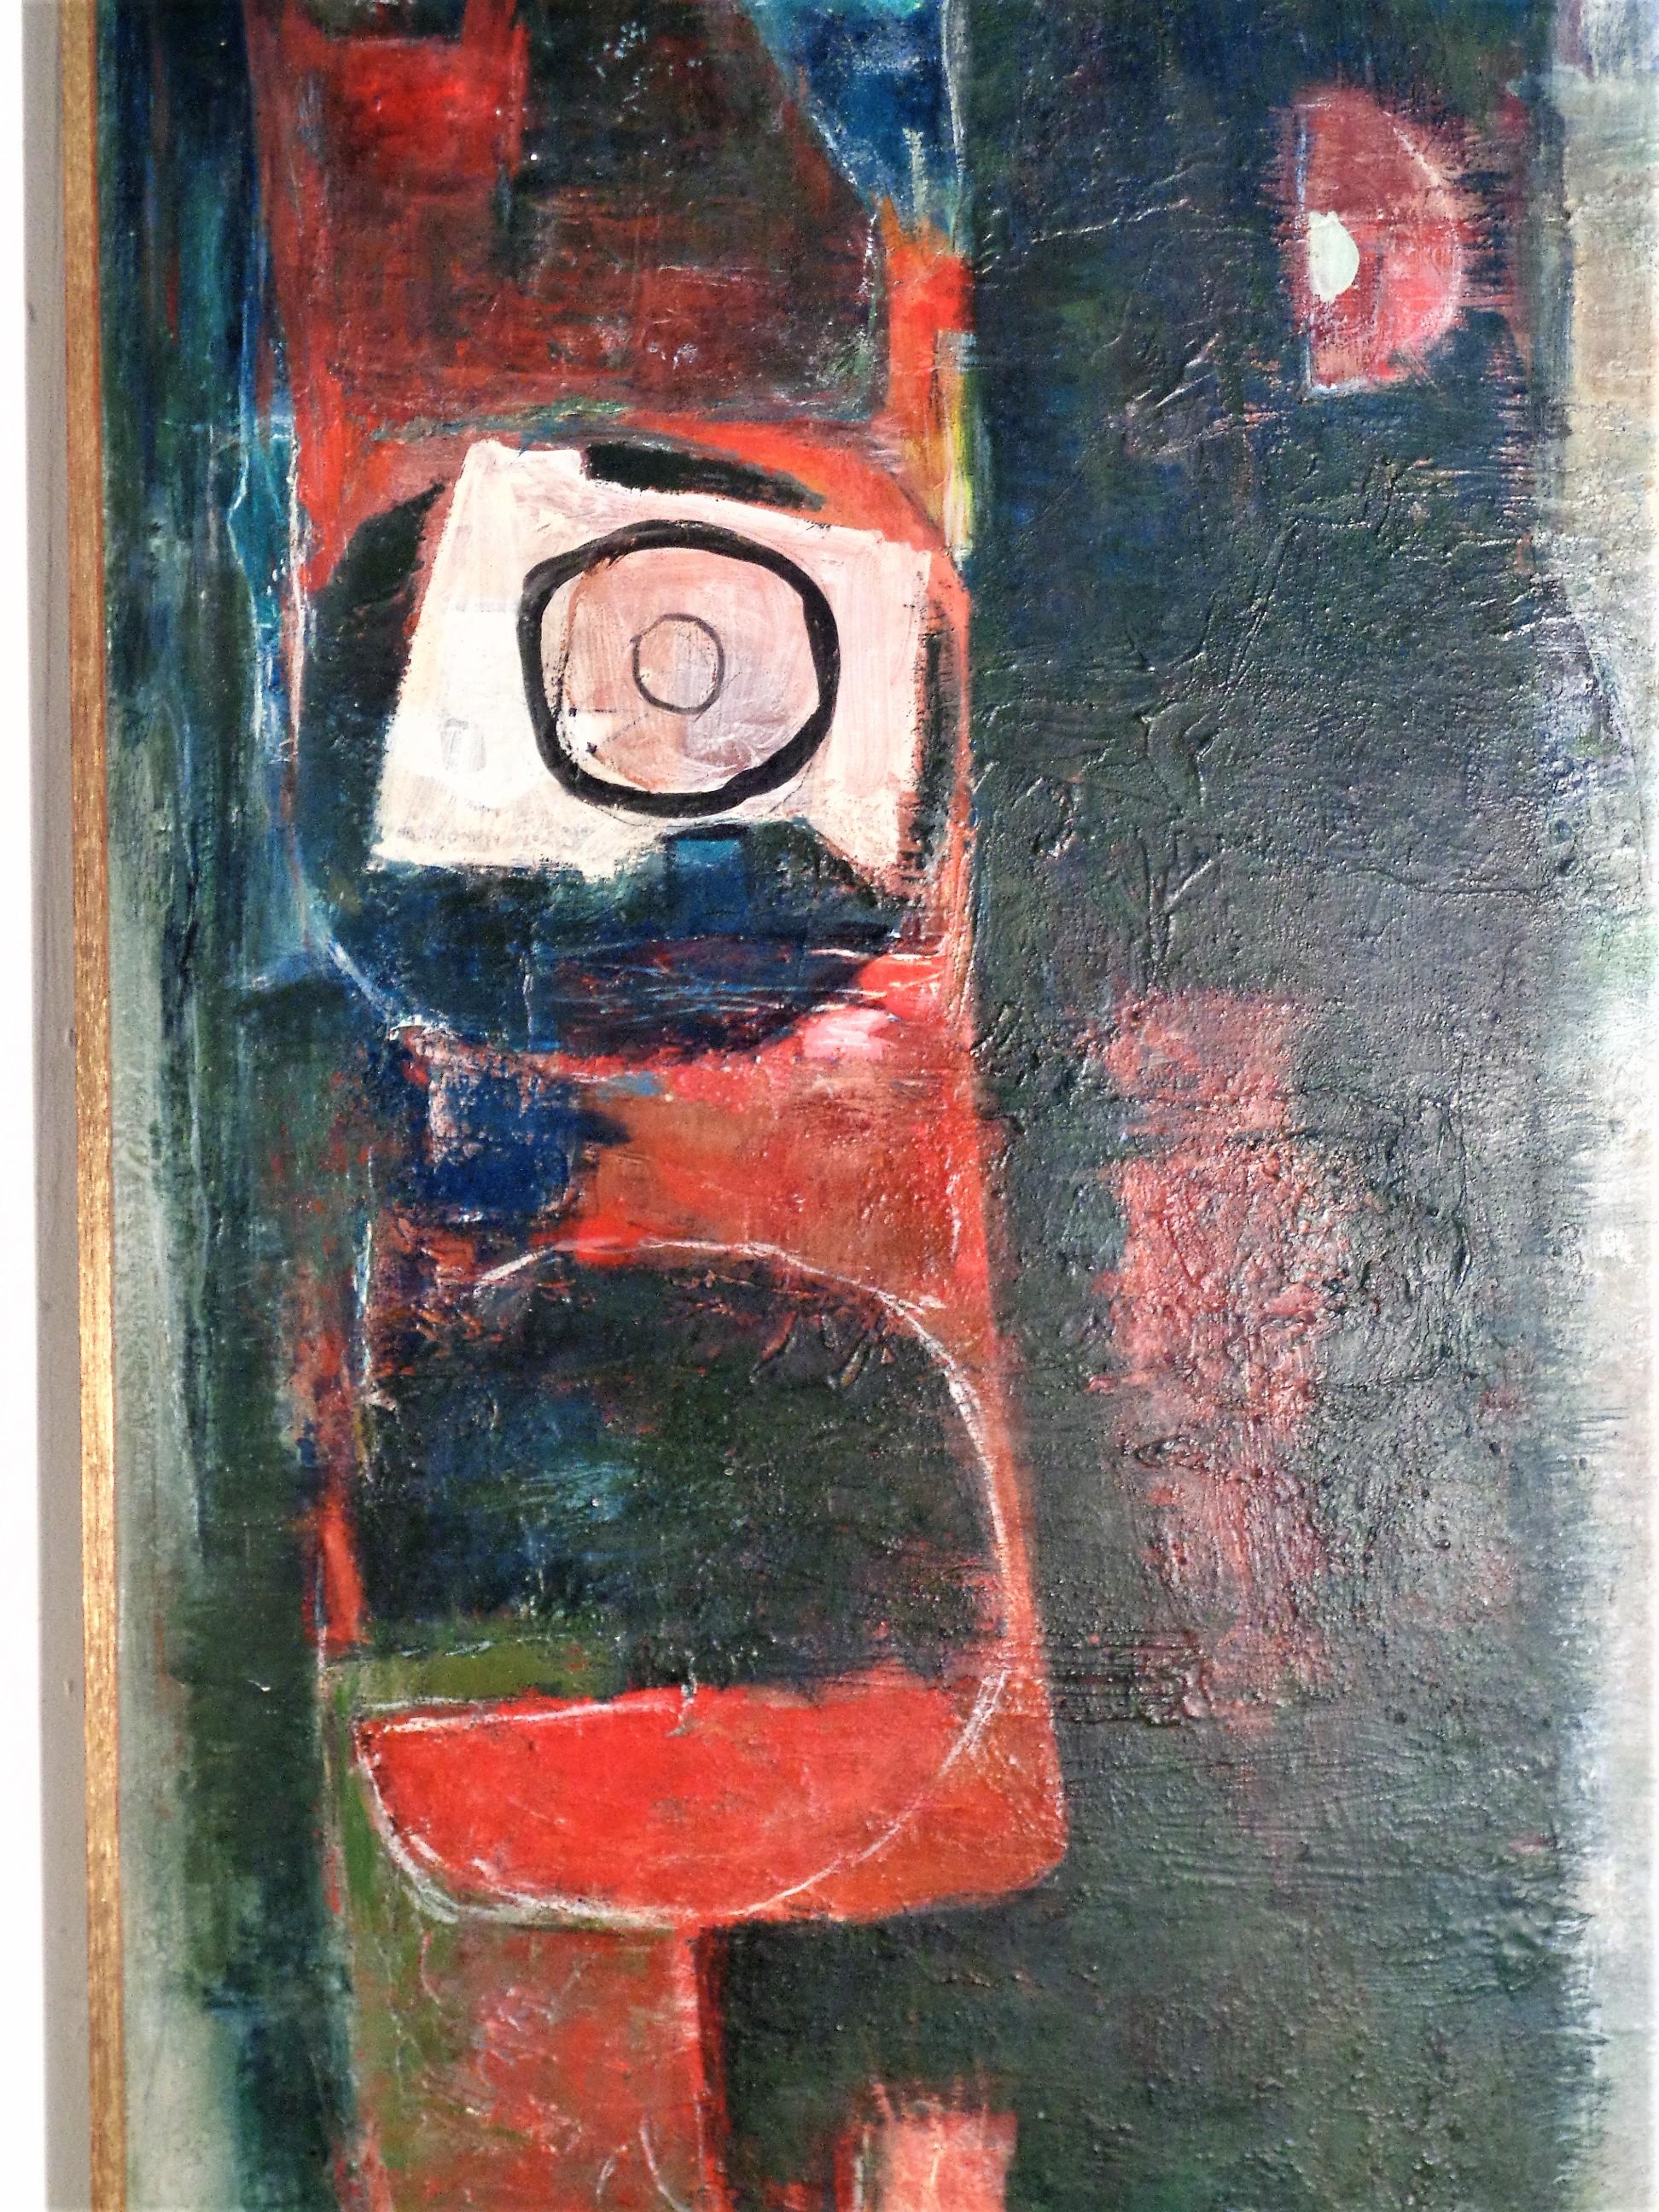 Abstract modernist oil painting on masonite board by Russian born - Rochester, New York painter, sculptor - Hilda Altschule / Hilda Altschule Coates ( 1900-1983 ) set in original period giltwood frame. Signed lower right corner H. Altschule dated